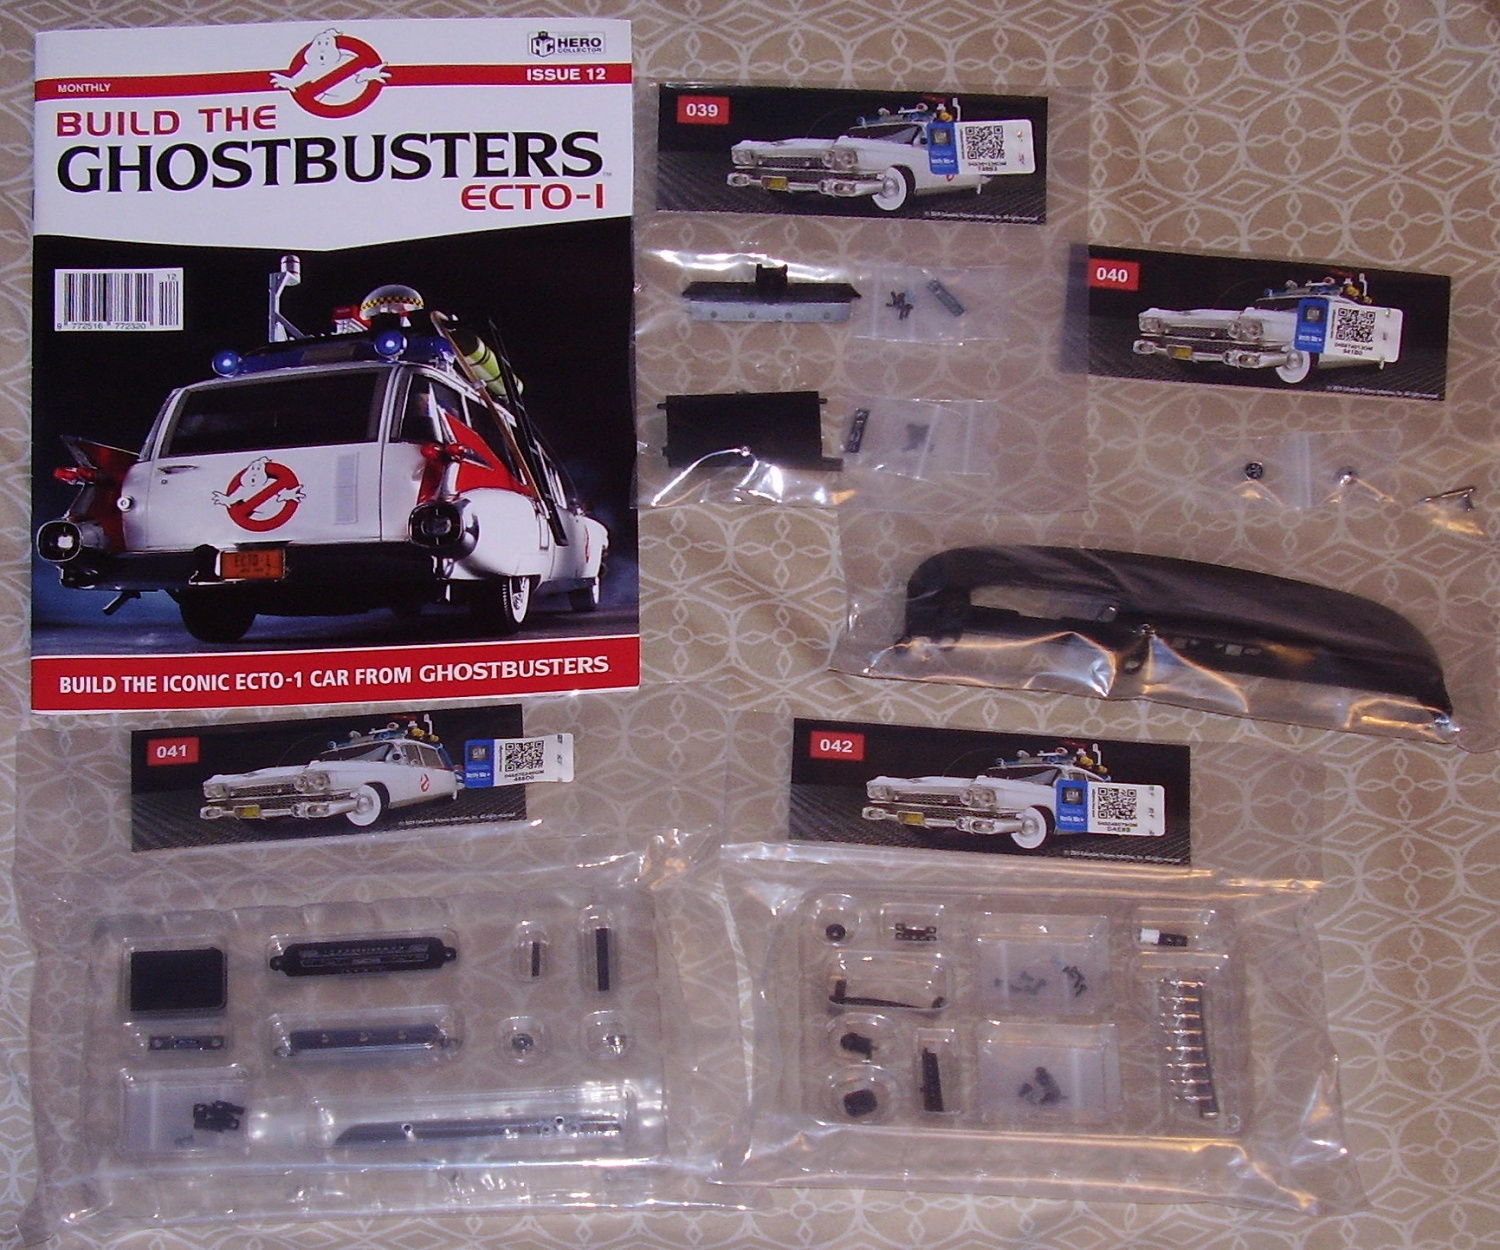 Magazine Issue 12 With 4 Model Stages Eaglemoss Build the Ghostbusters Ecto 1